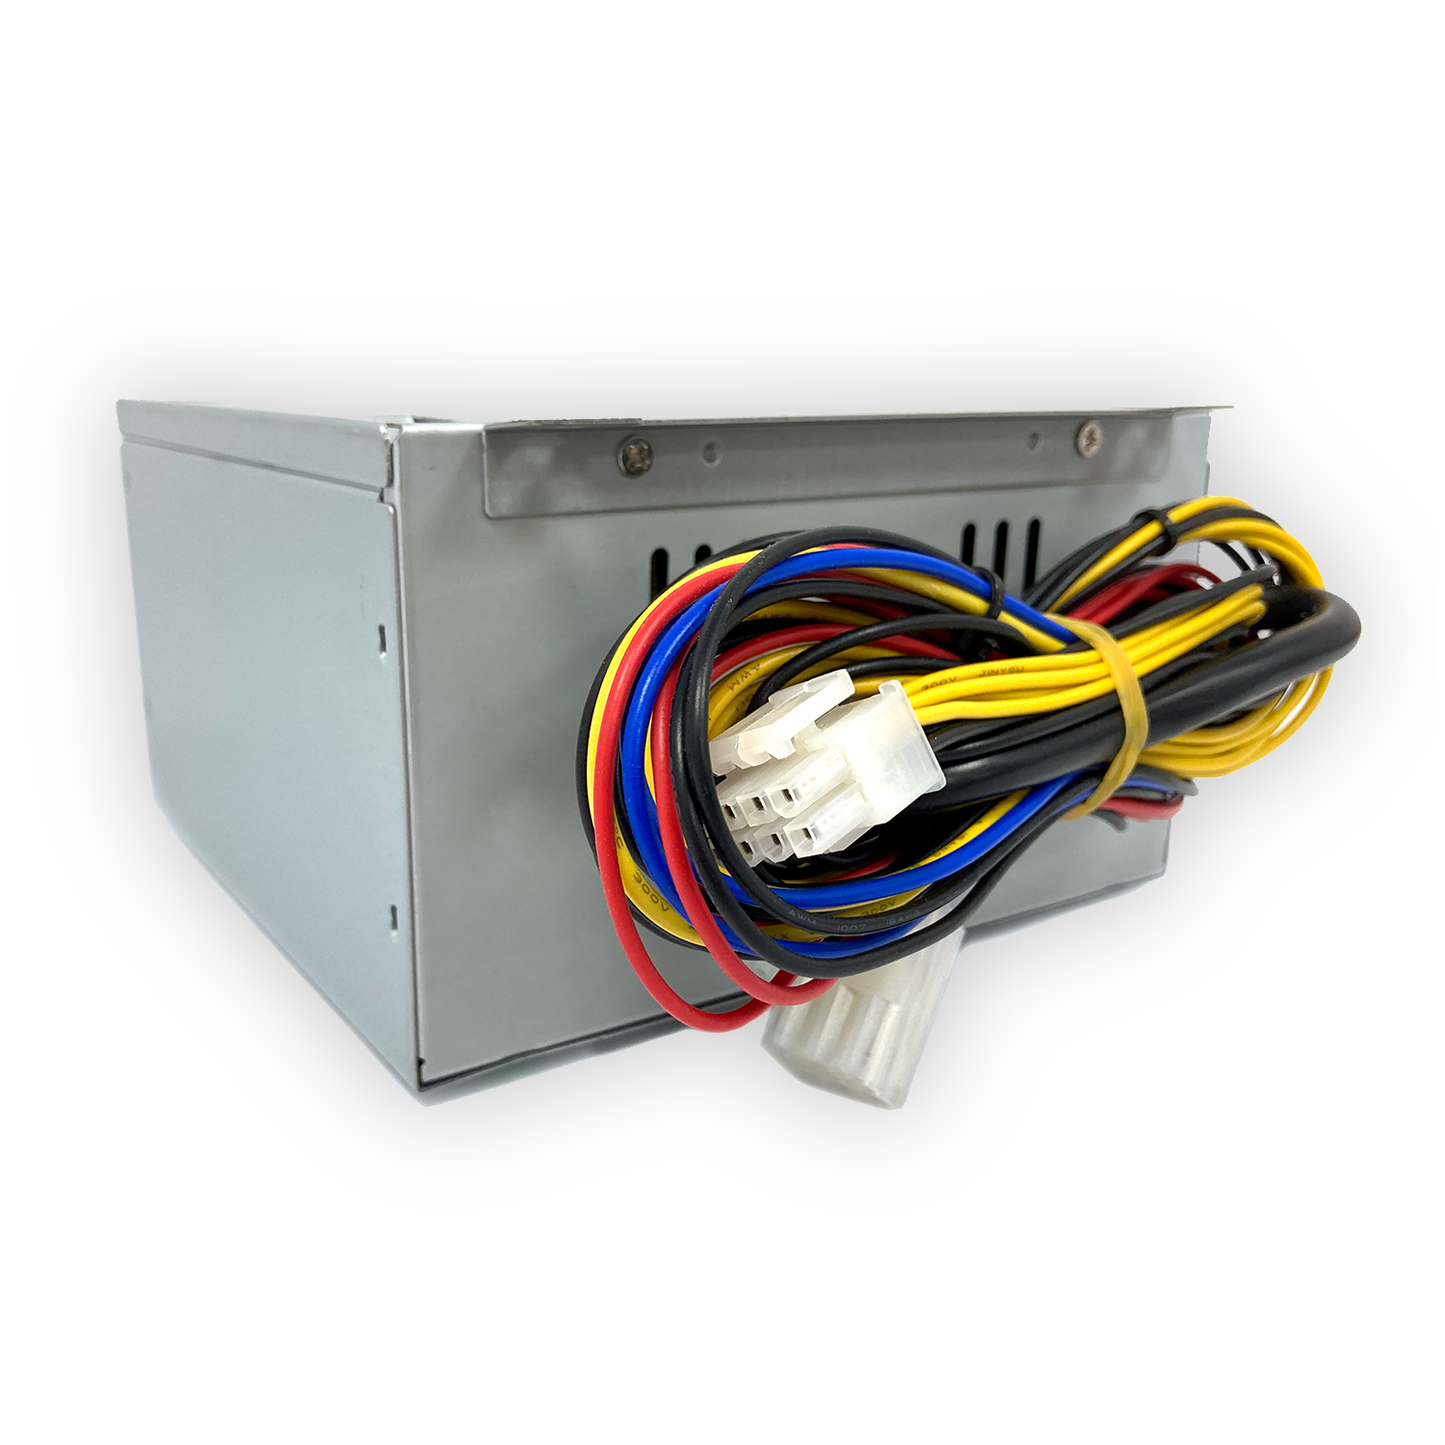 The 600-Watt Power Supply is the standard power supply used in every cabinet.